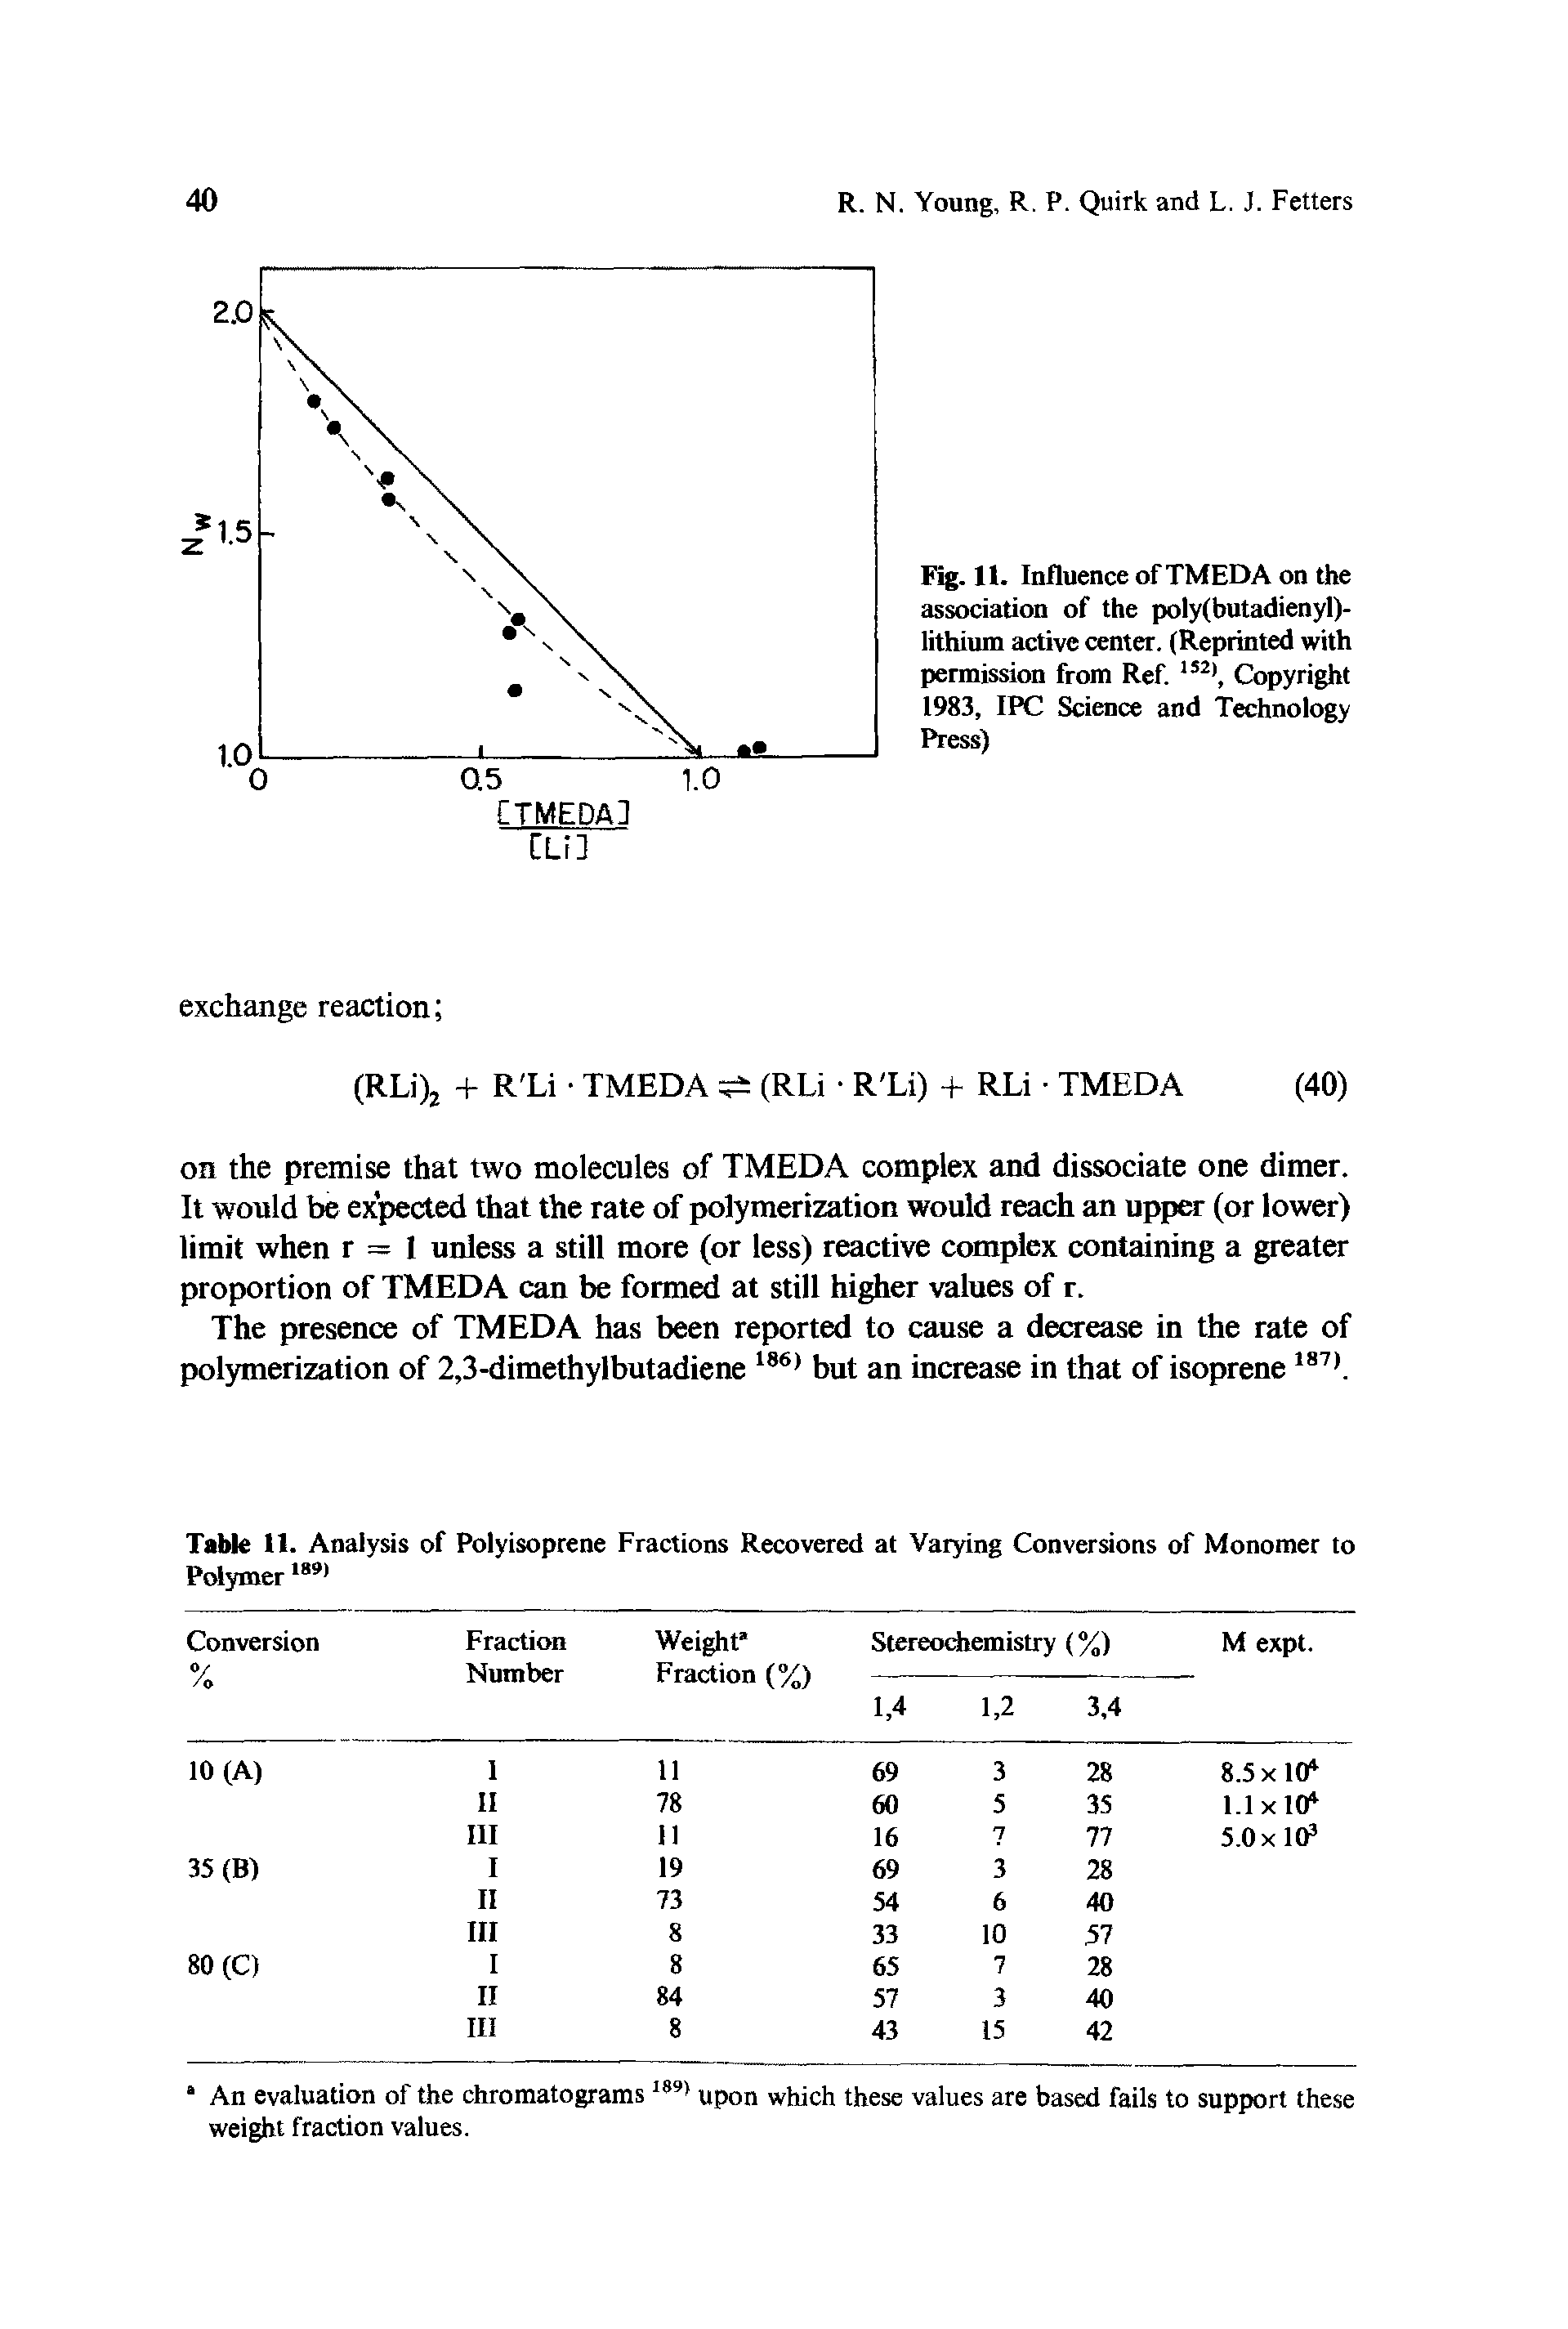 Fig. 11. Influence of TMEDA on the association of the poly(butadienyl)-lithium active center. (Reprinted with permission from Ref. 152), Copyright 1983, IPC Science and Technology Press)...